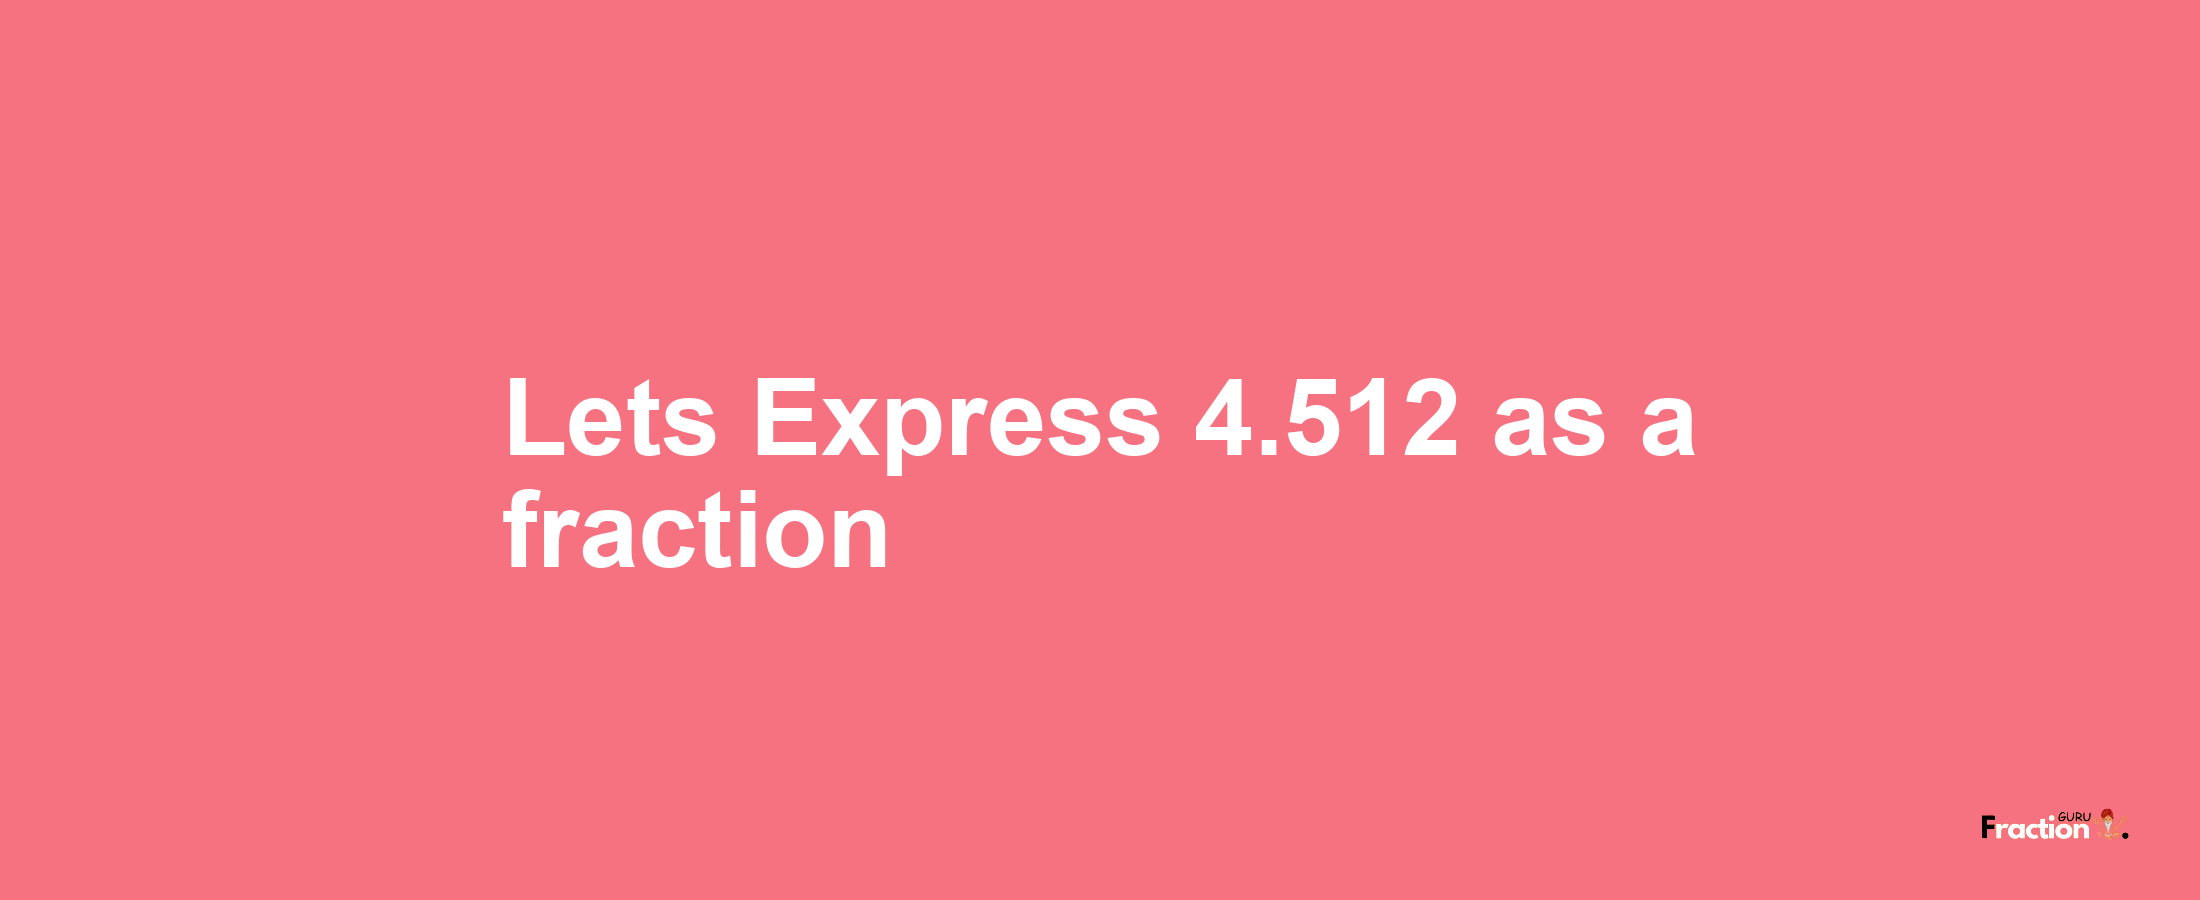 Lets Express 4.512 as afraction